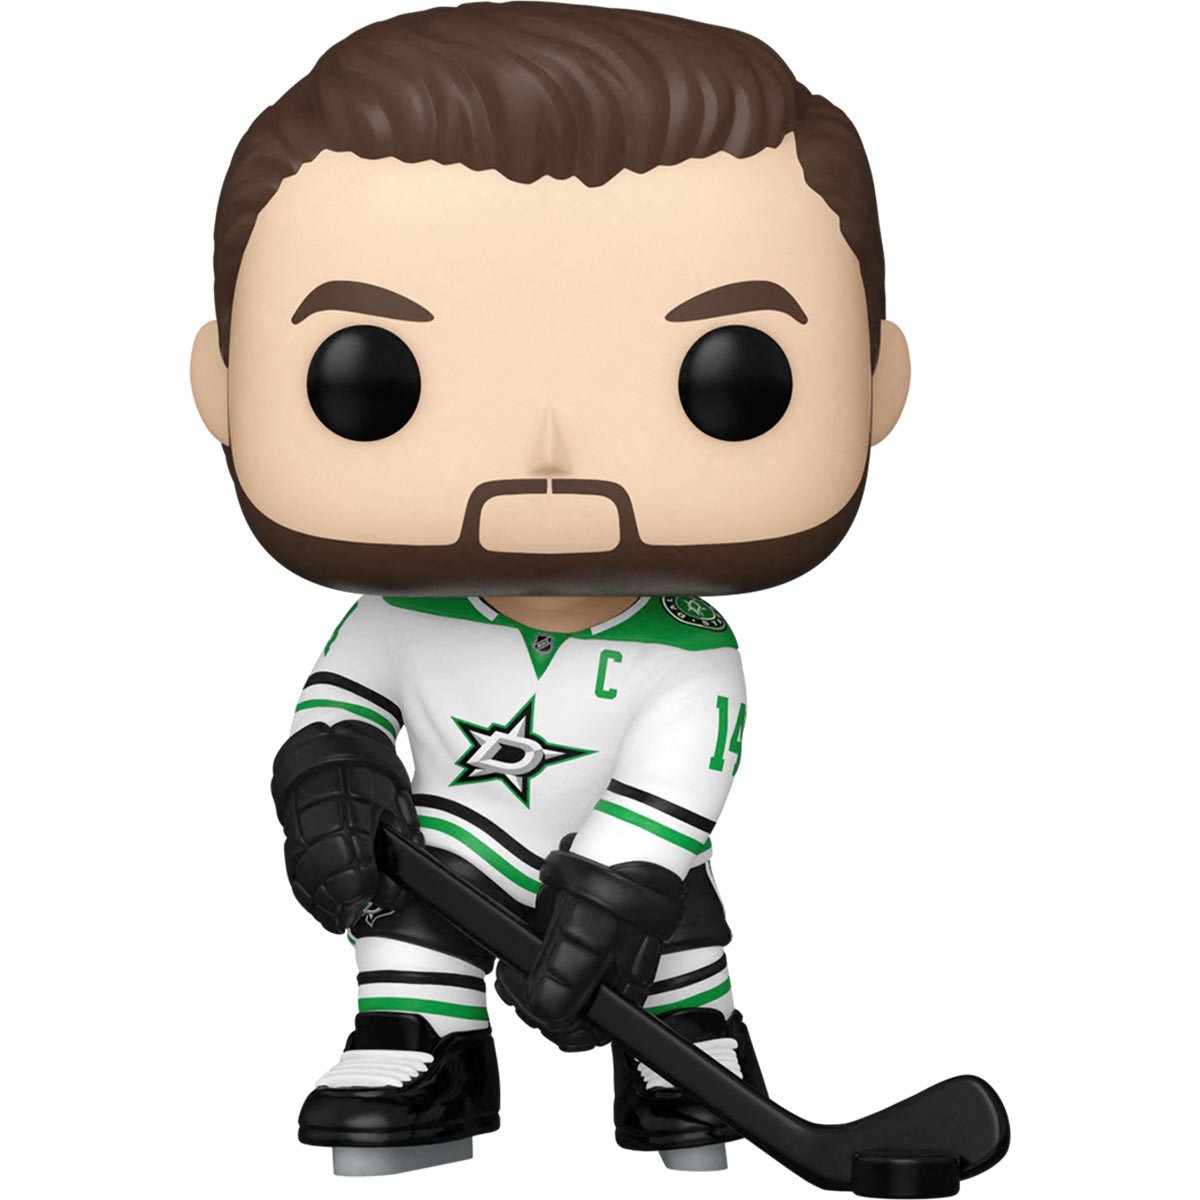 All the Funko POP NHL figures